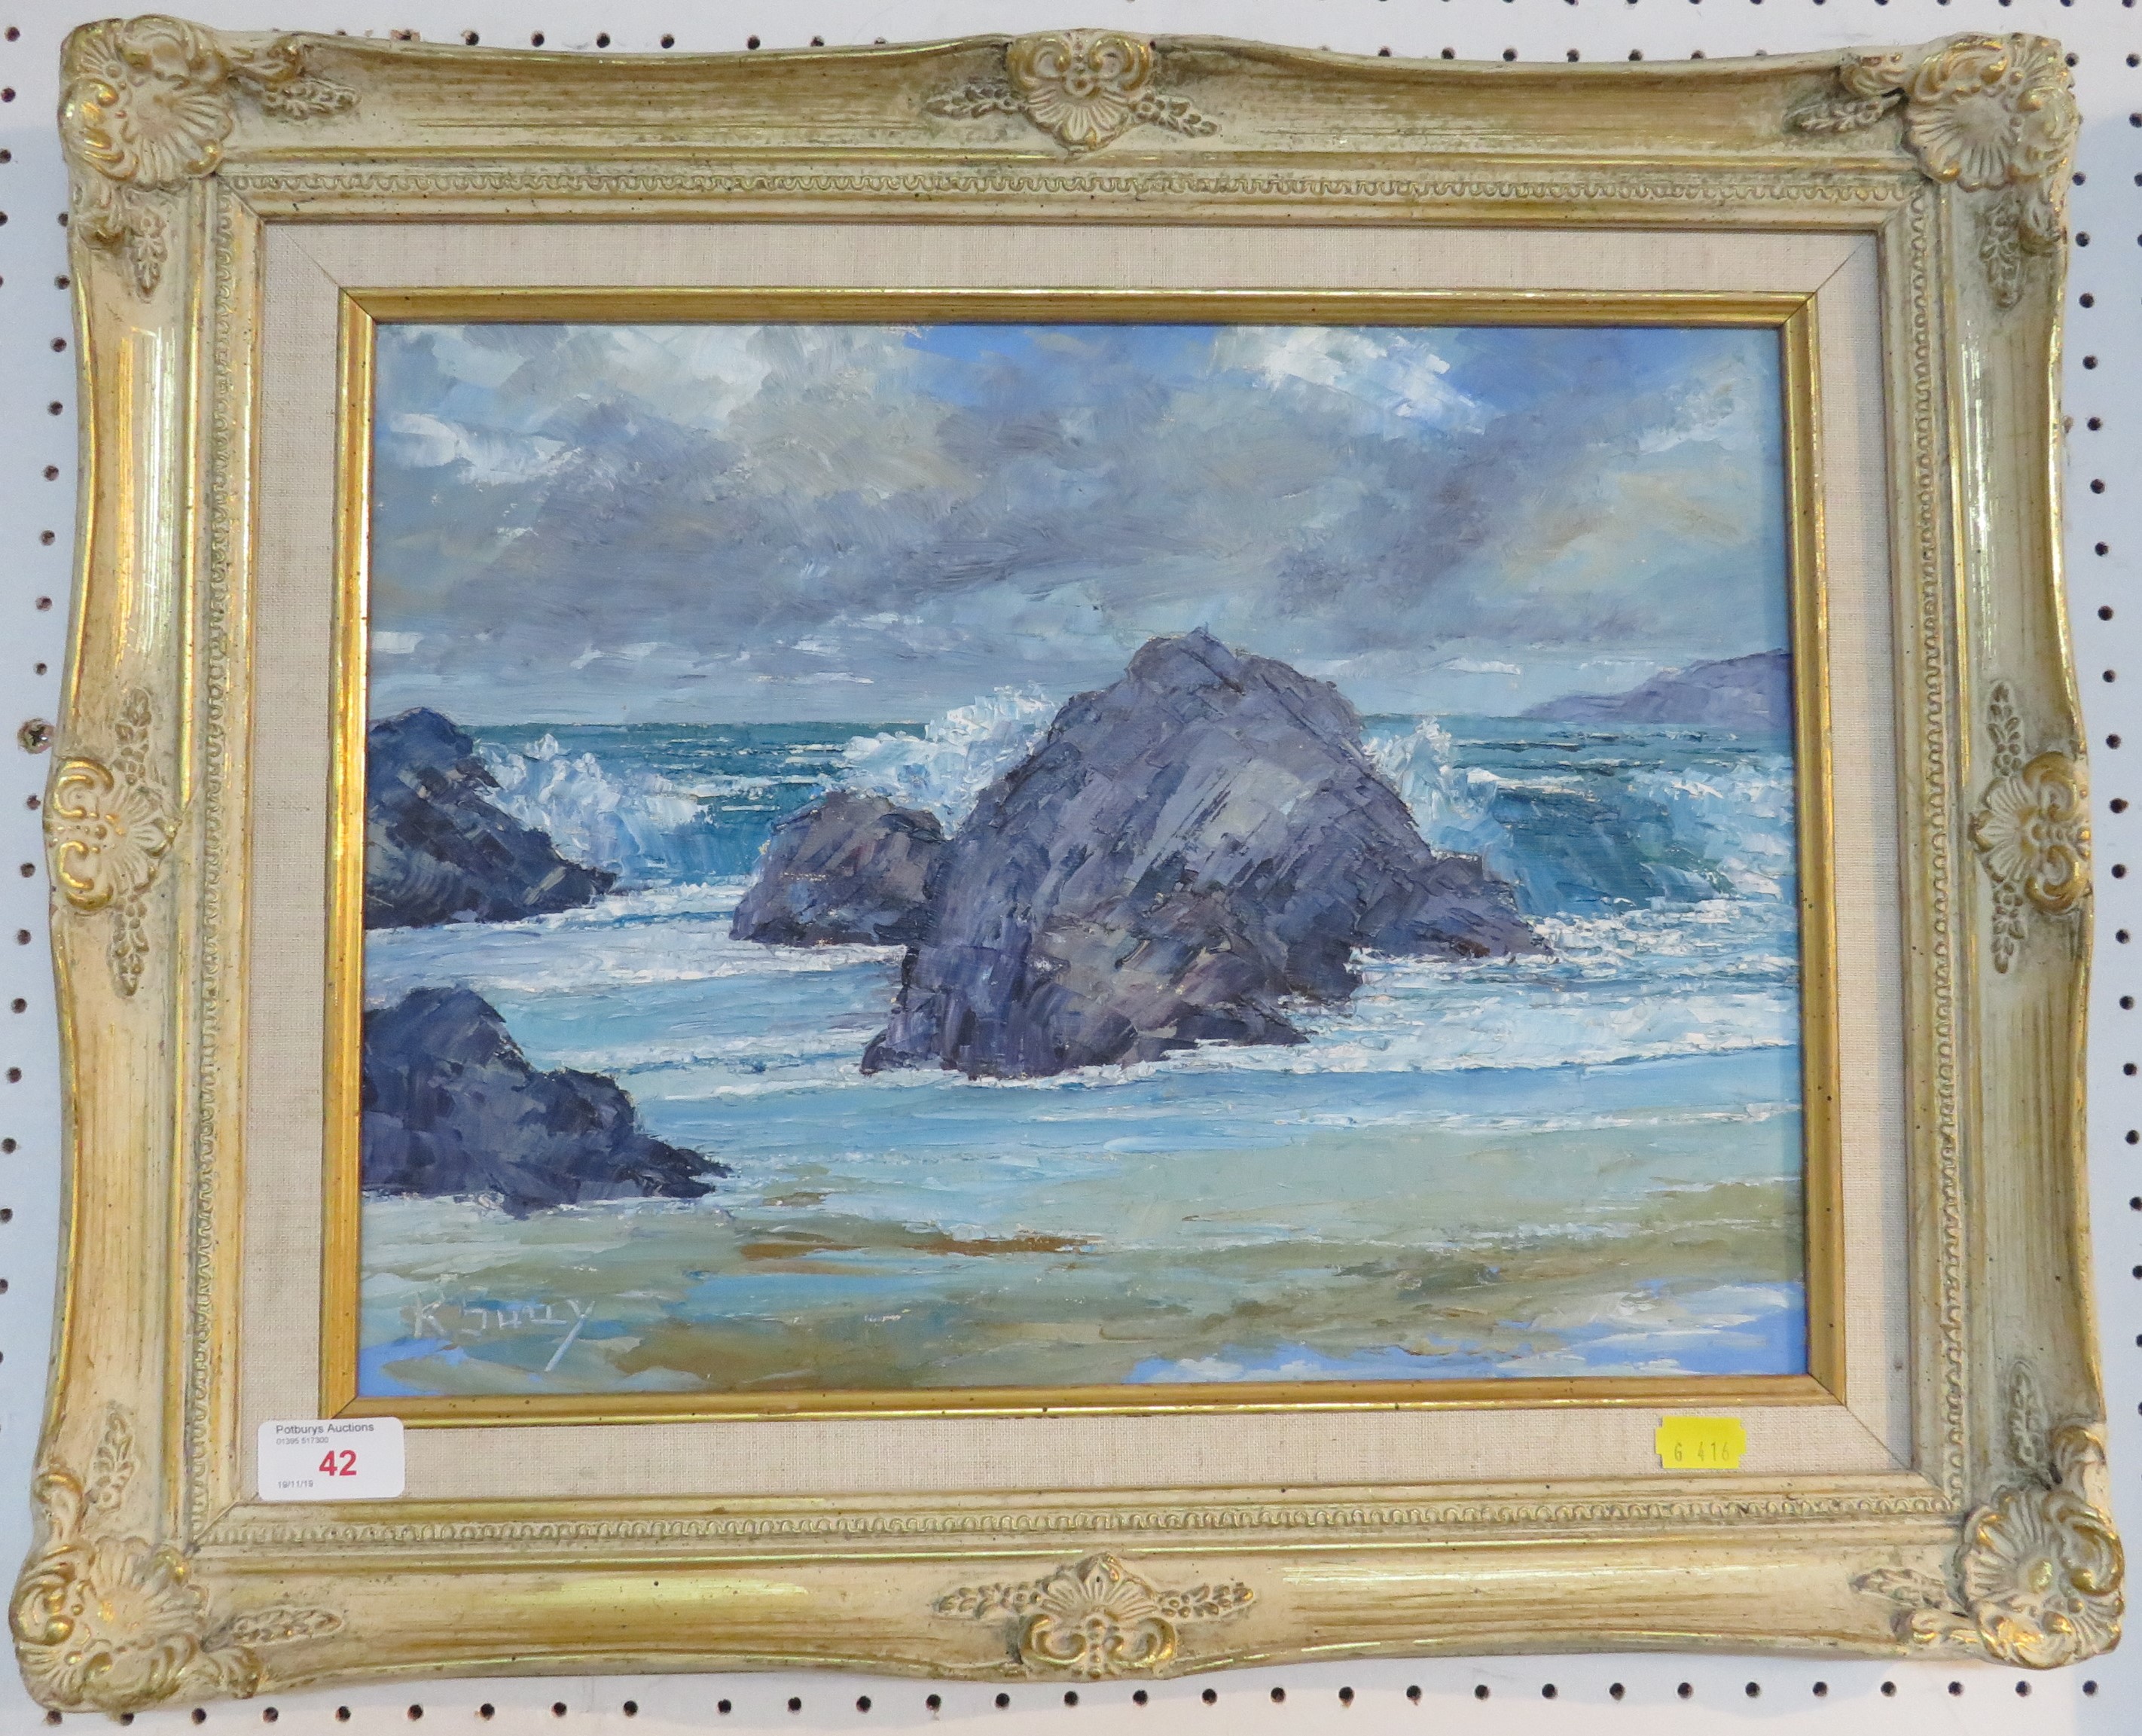 K Shuy - rocky shore, oil on board, signed lower left, (29.5cm x 39cm), in a decoratively moulded - Image 2 of 2